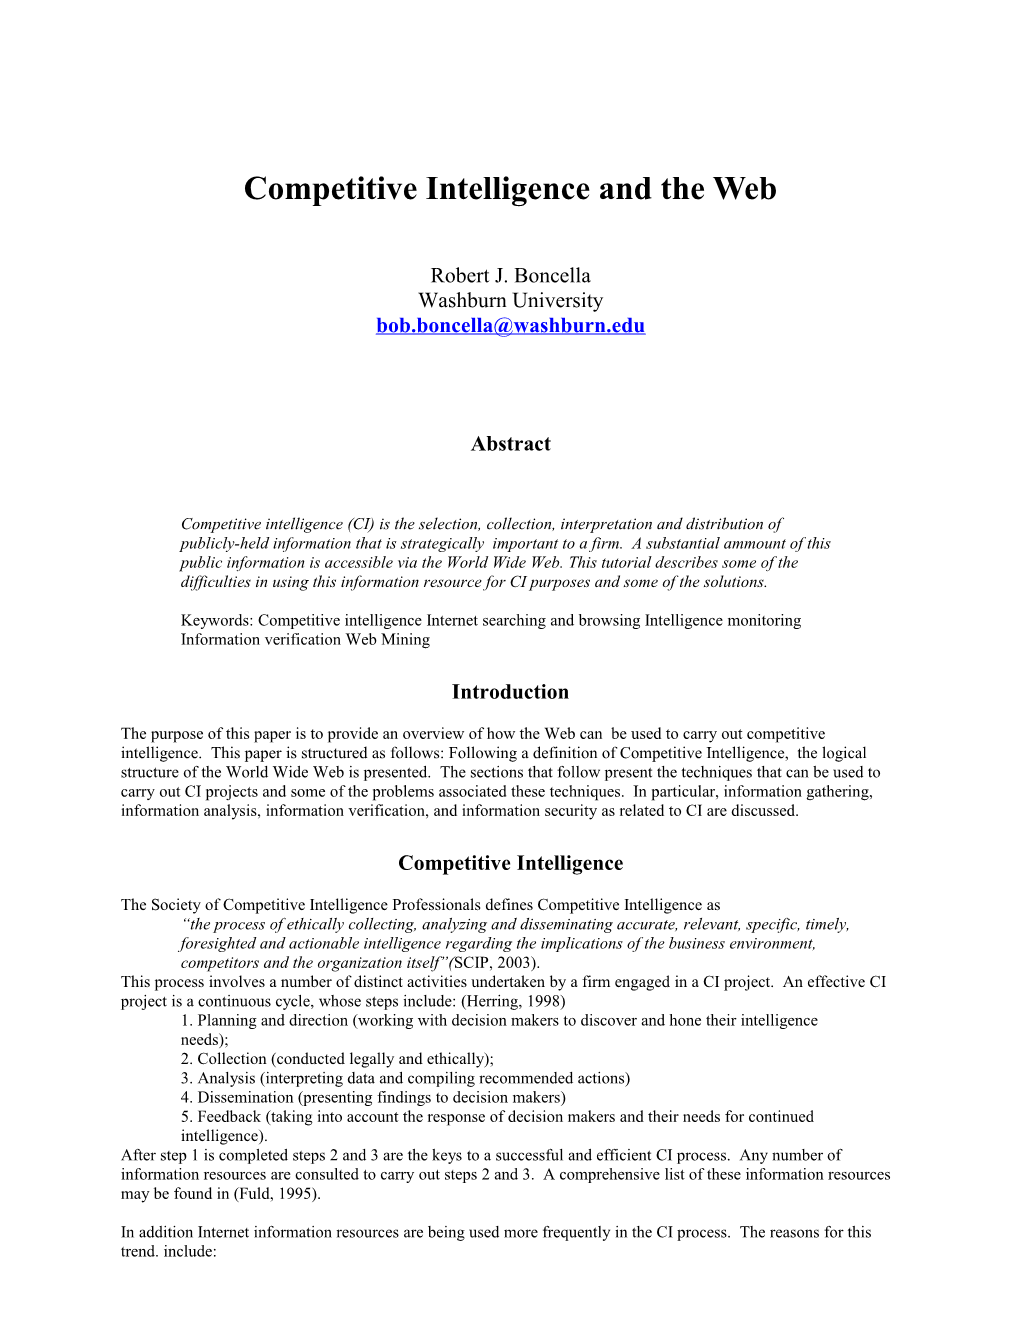 Competitve Intelligence and the Web